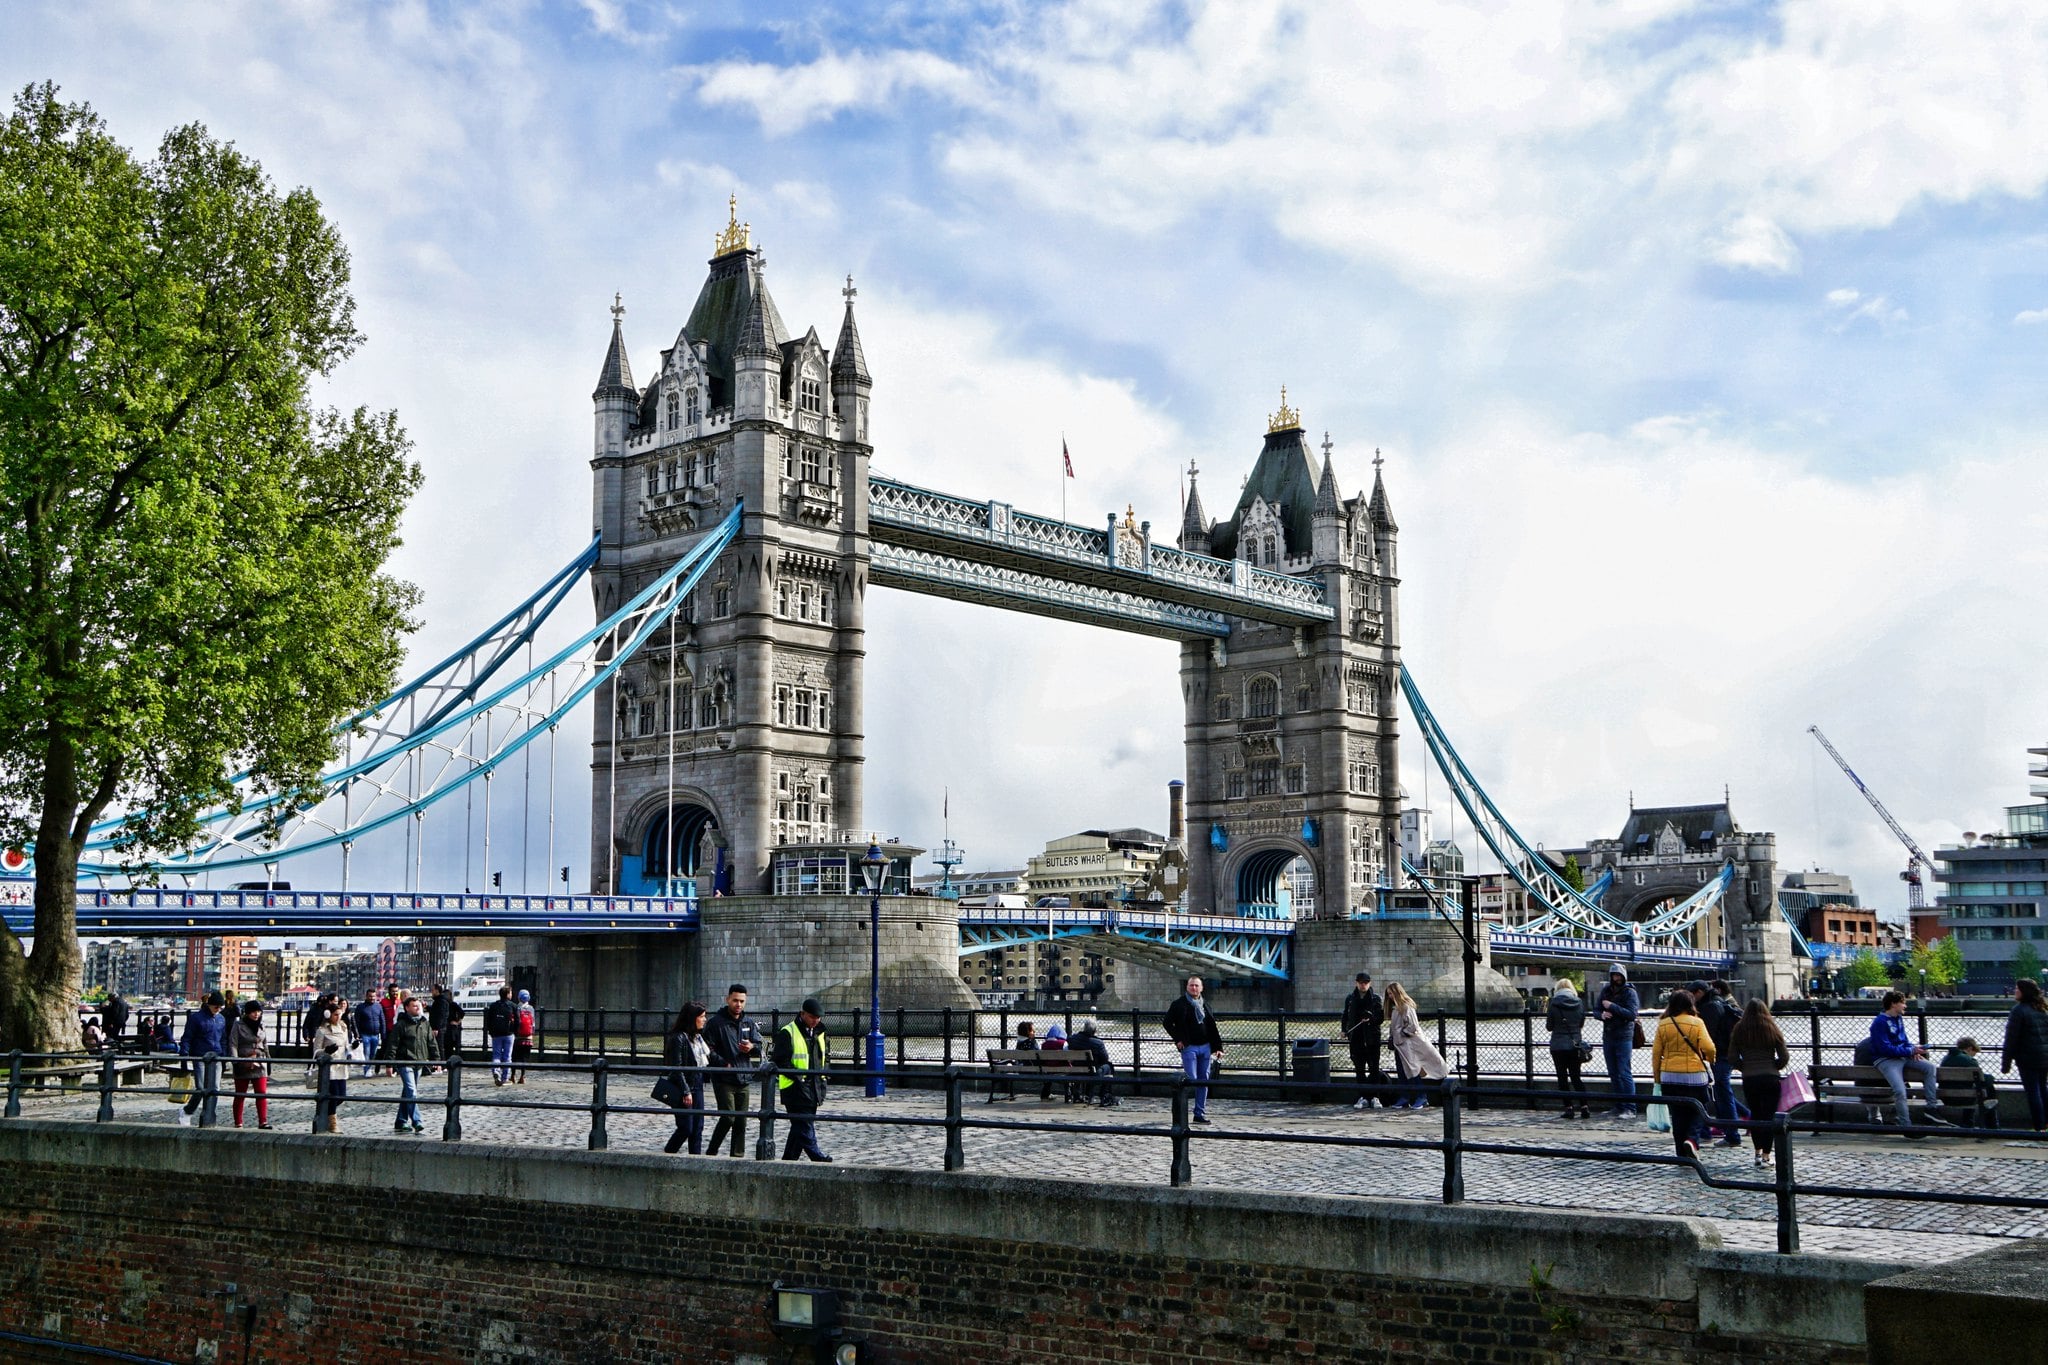 The London Bridge is an iconic place to visit in London